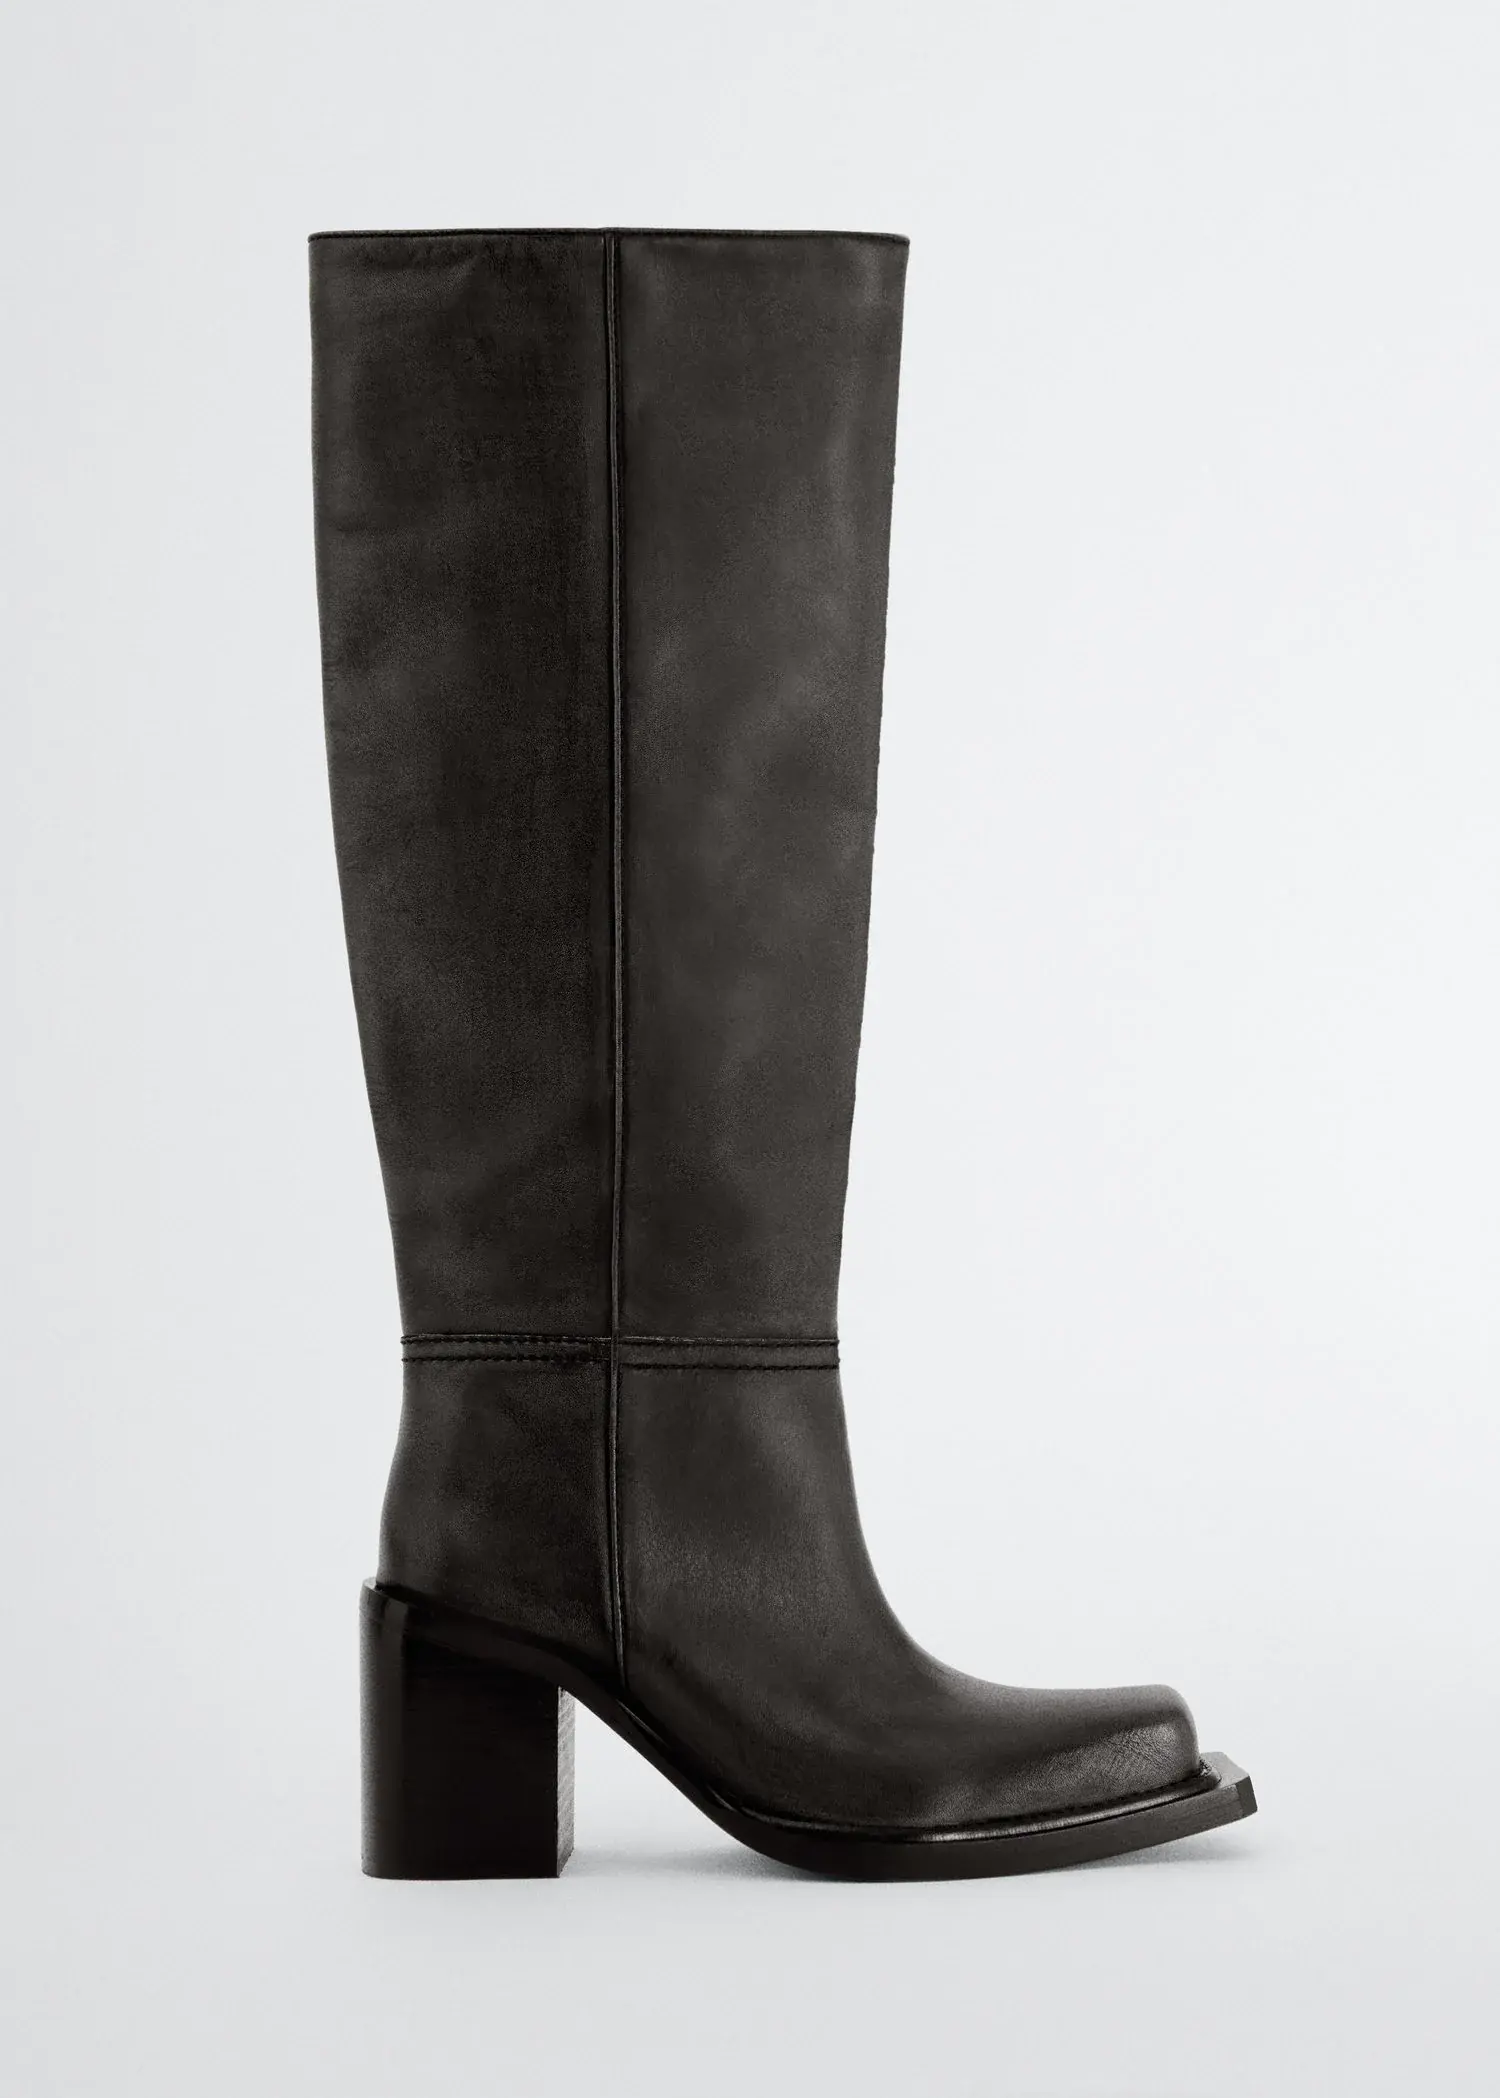 Mango Leather boots with tall leg. 2